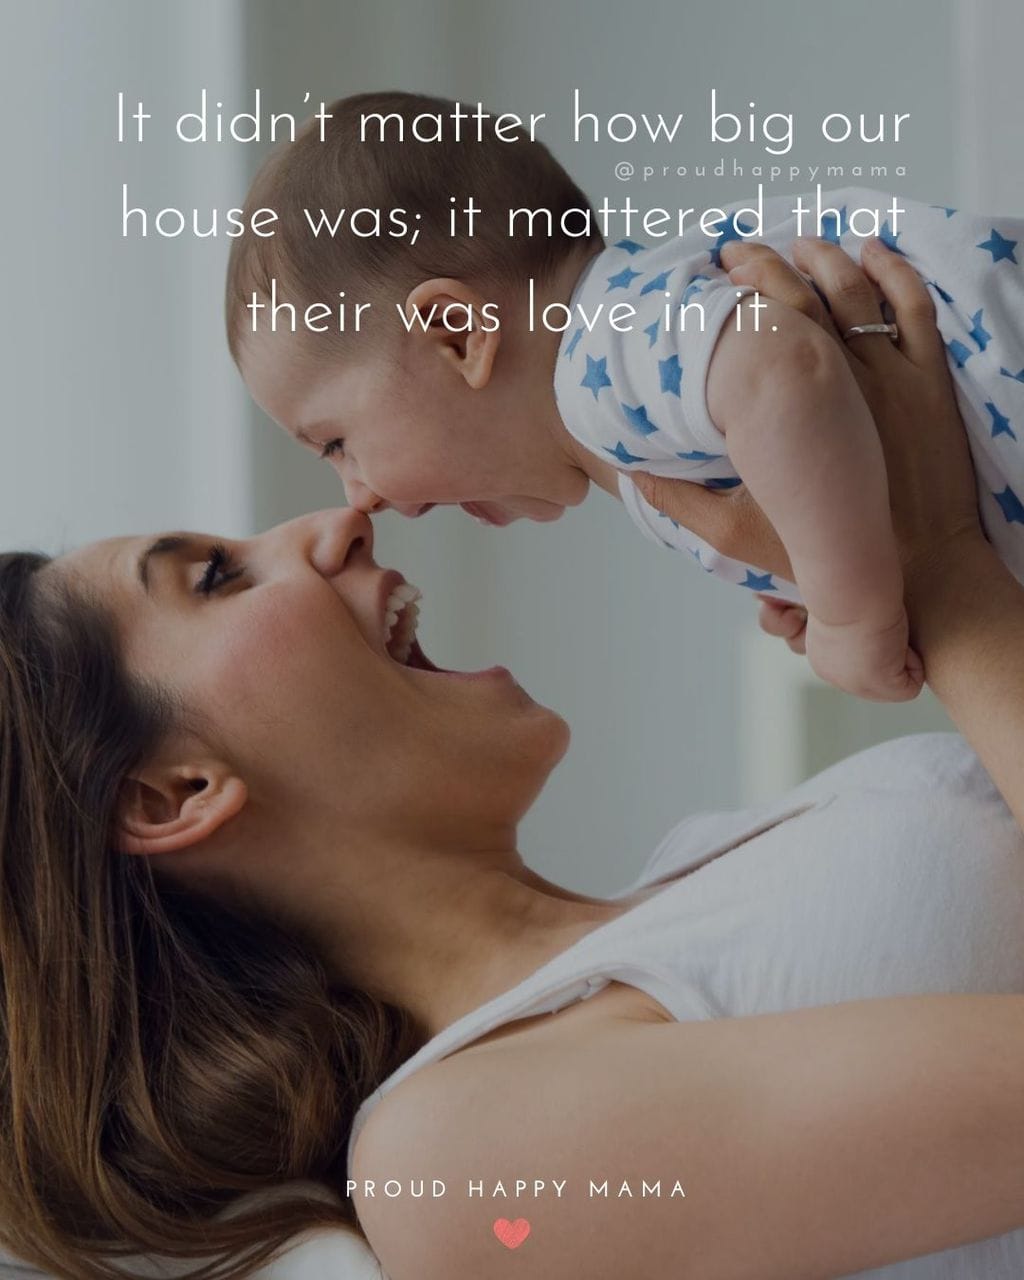 Family Quotes Short | It didn’t matter how big our house was; it mattered that their was love in it.